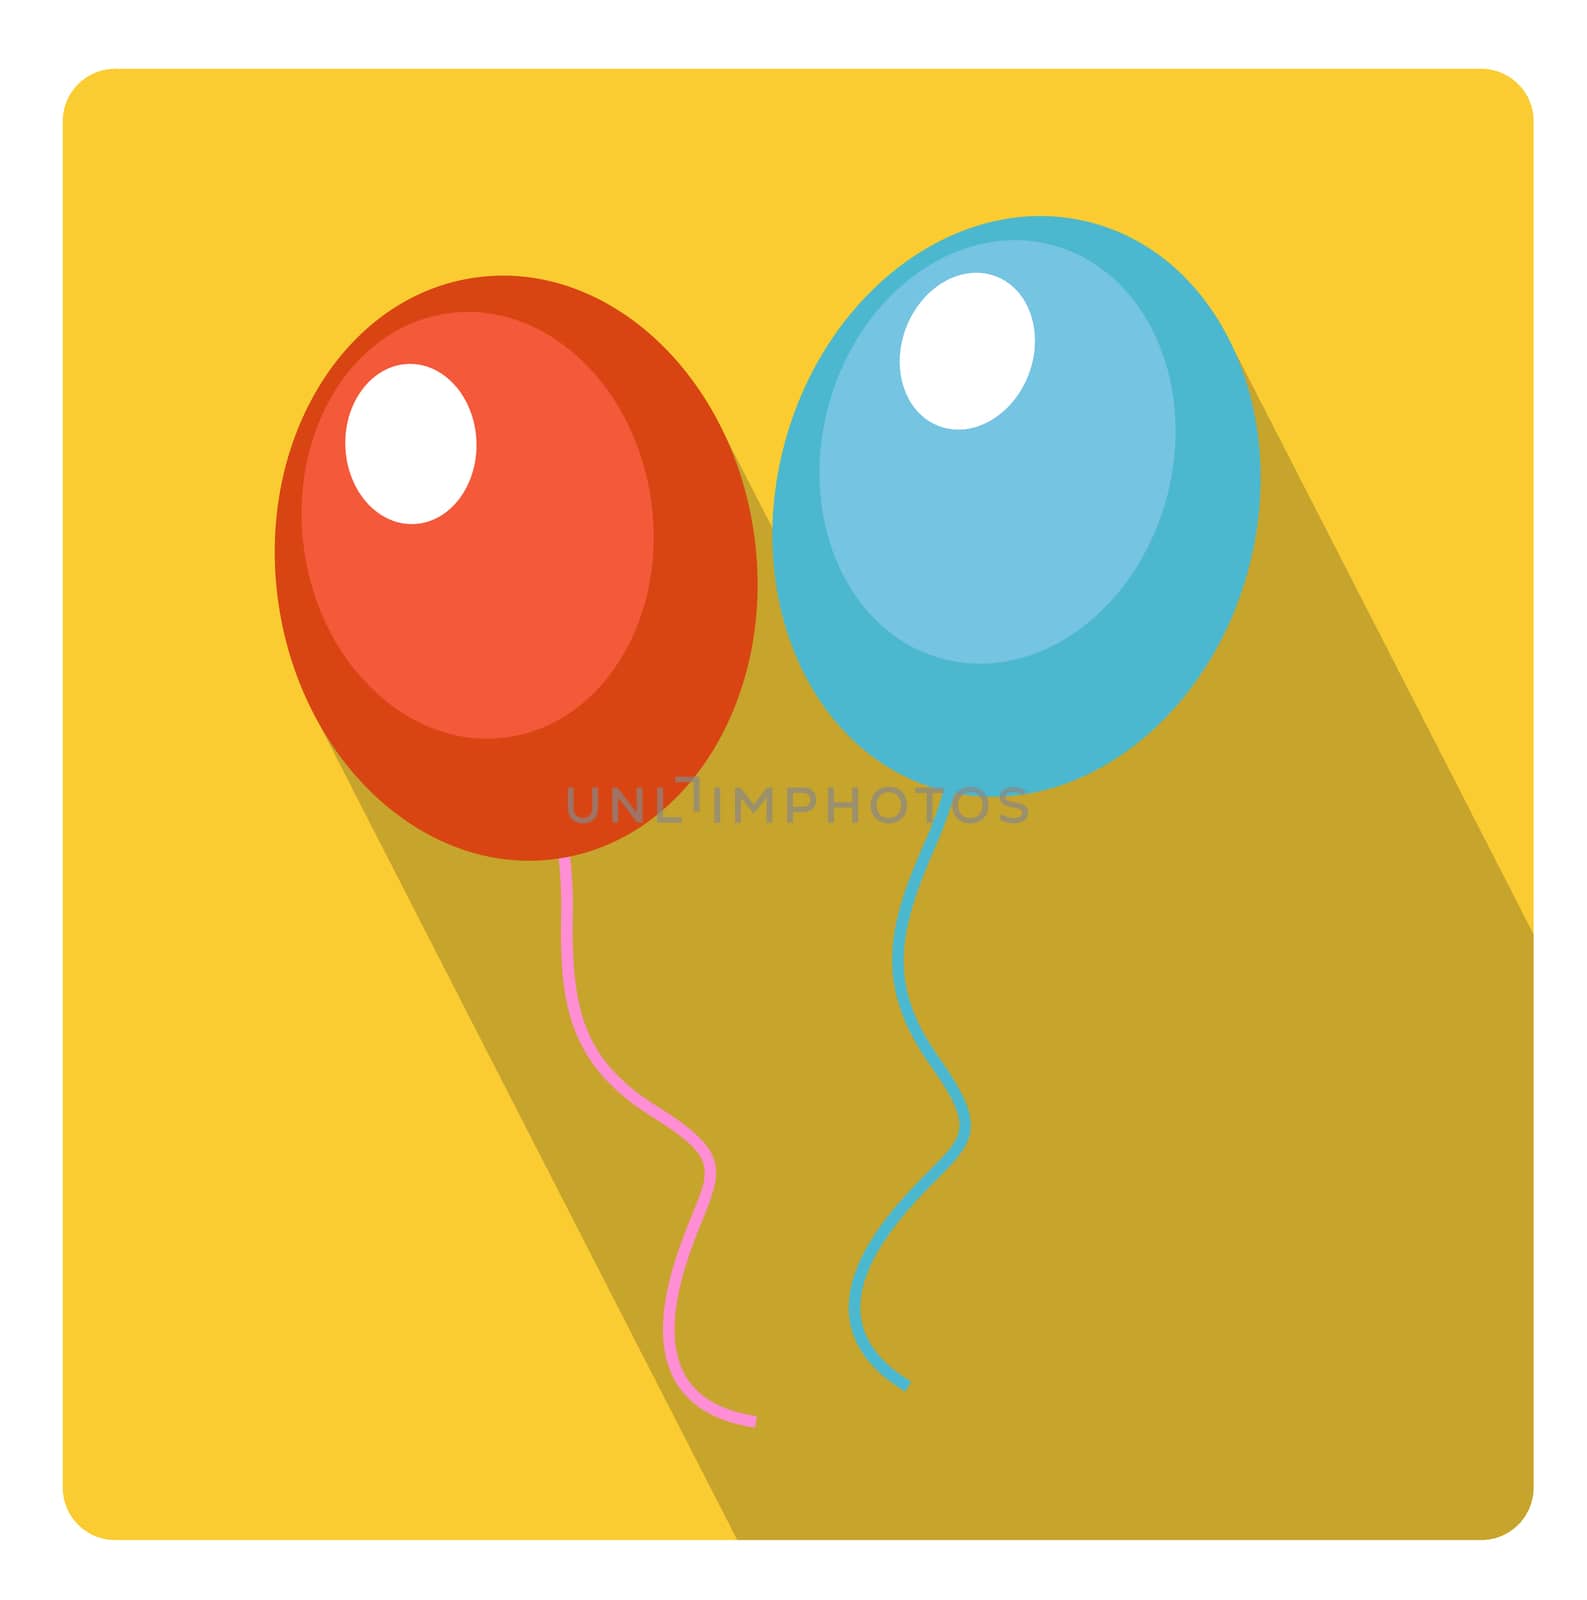 Balloons for celebration icon flat style with long shadows, isolated on white background. illustration